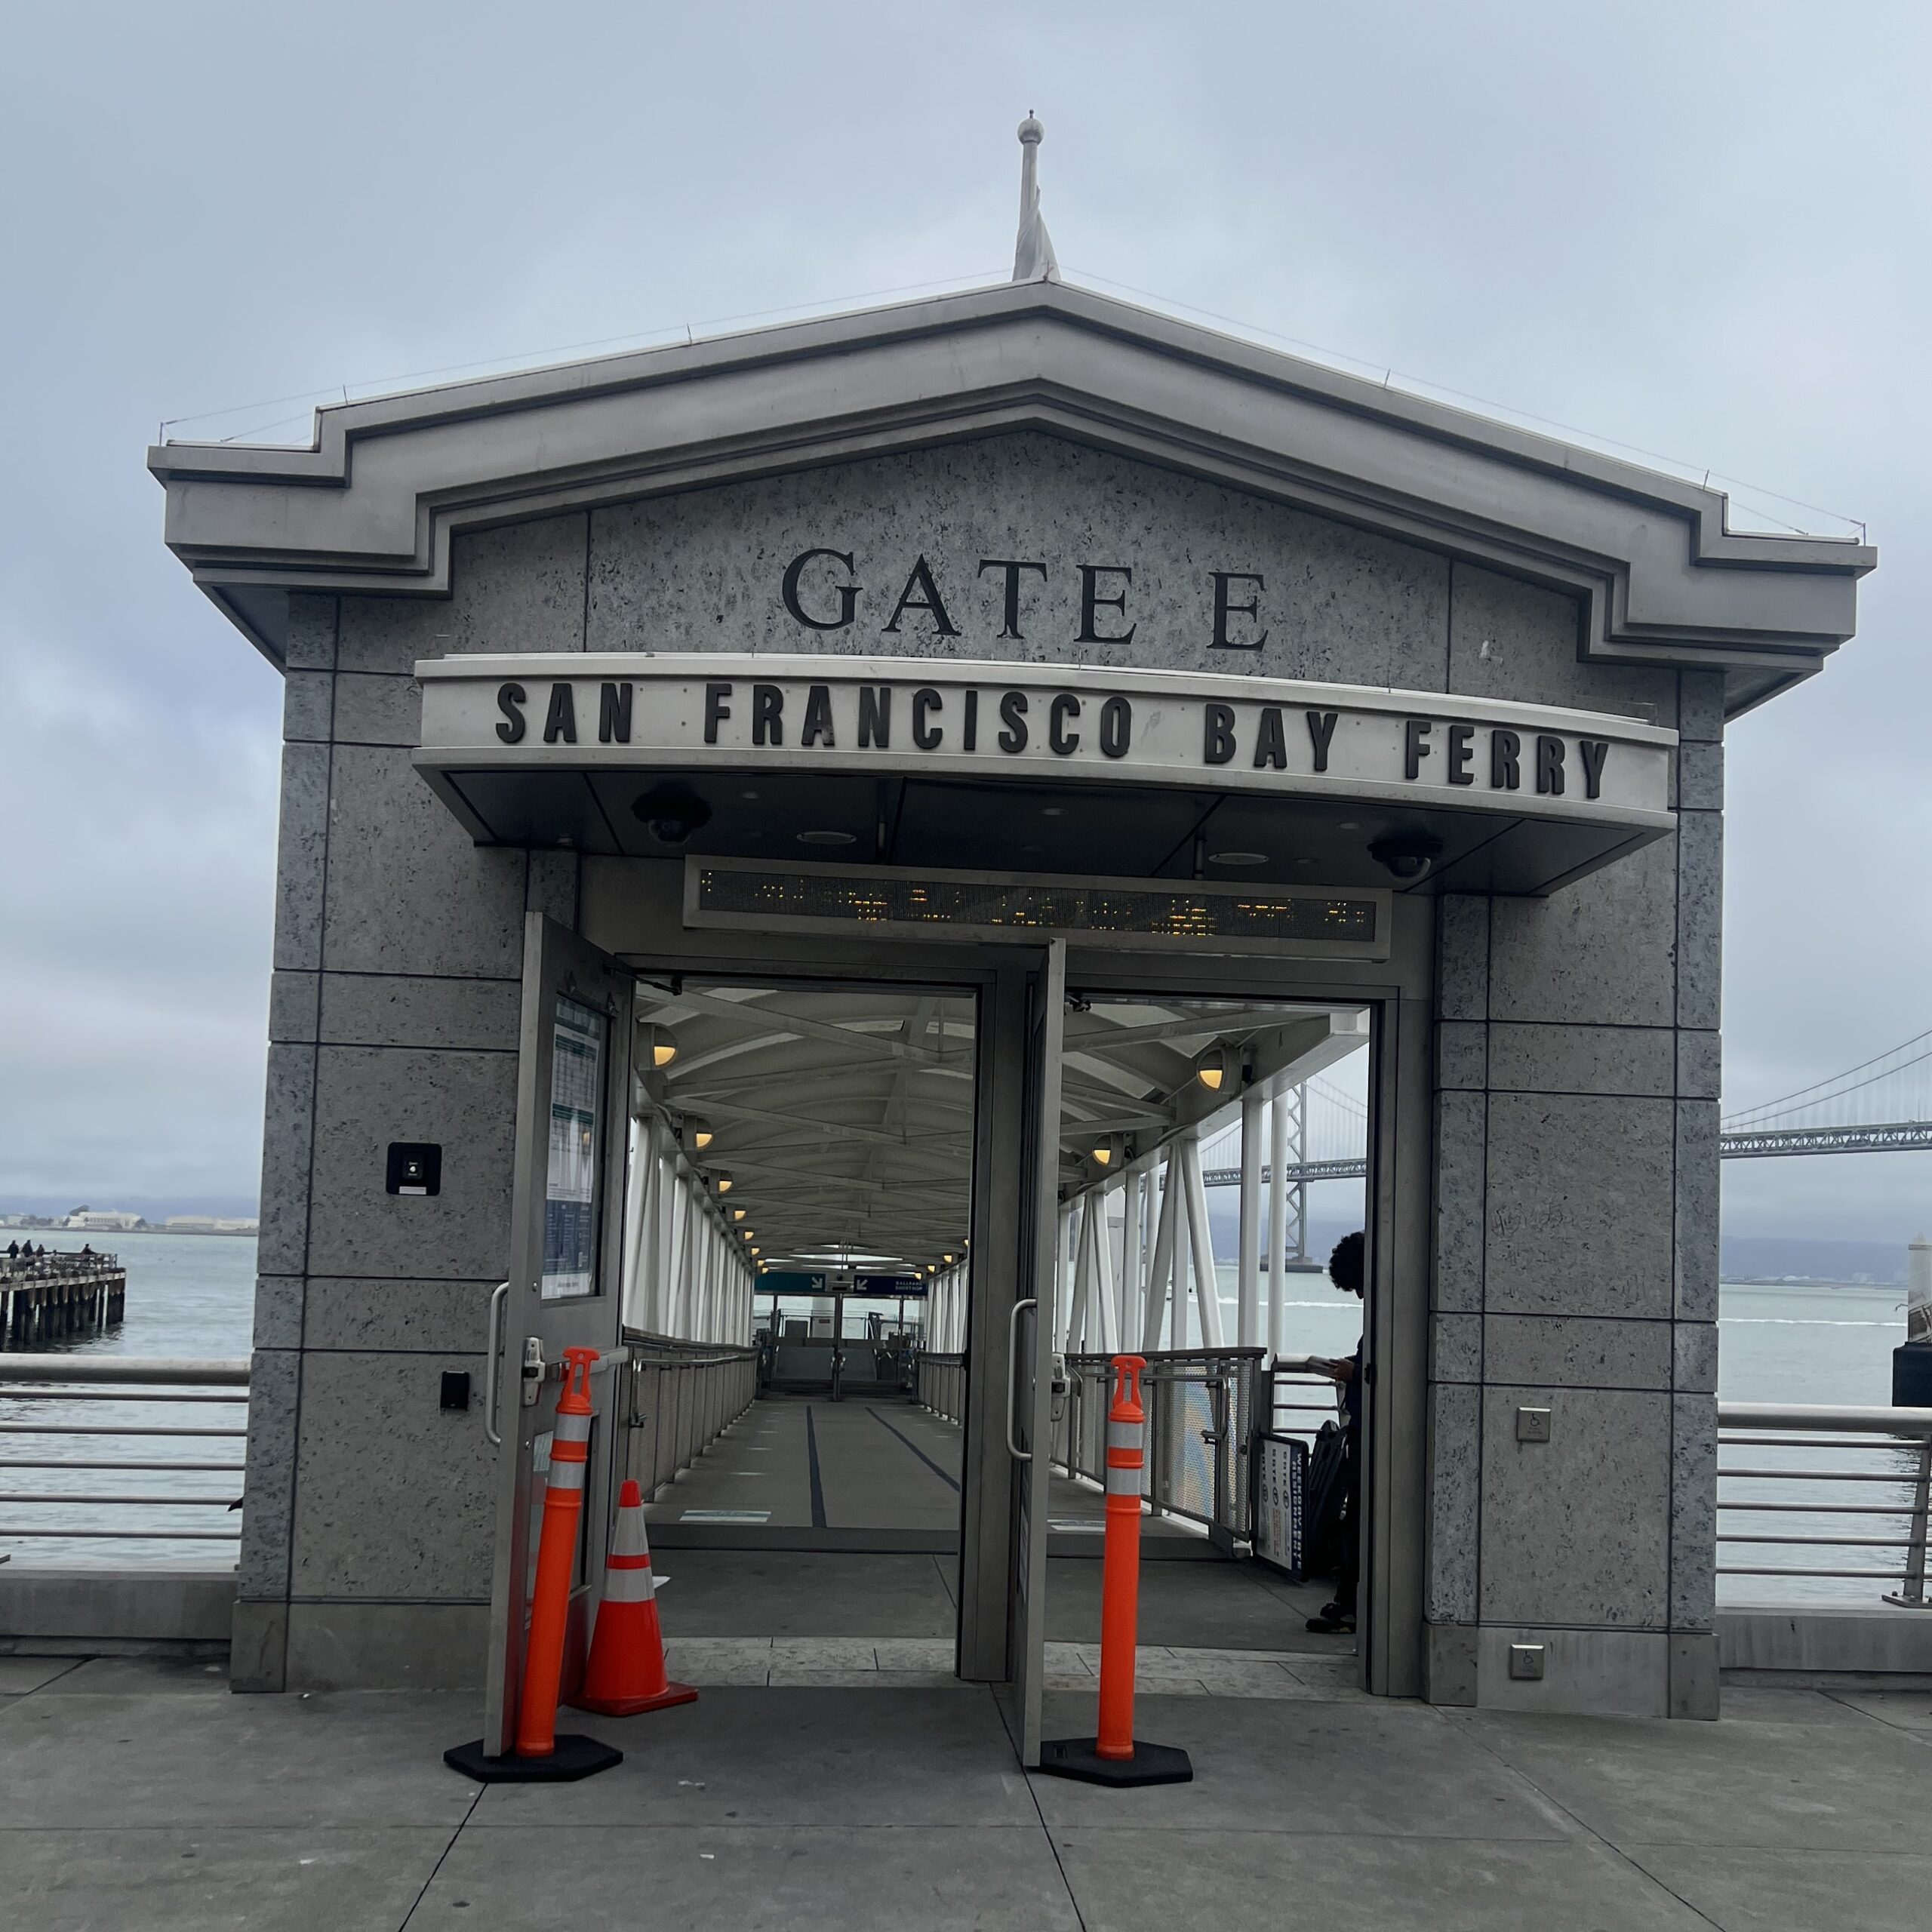 Gated entrance of the San Francisco Bay Ferry 